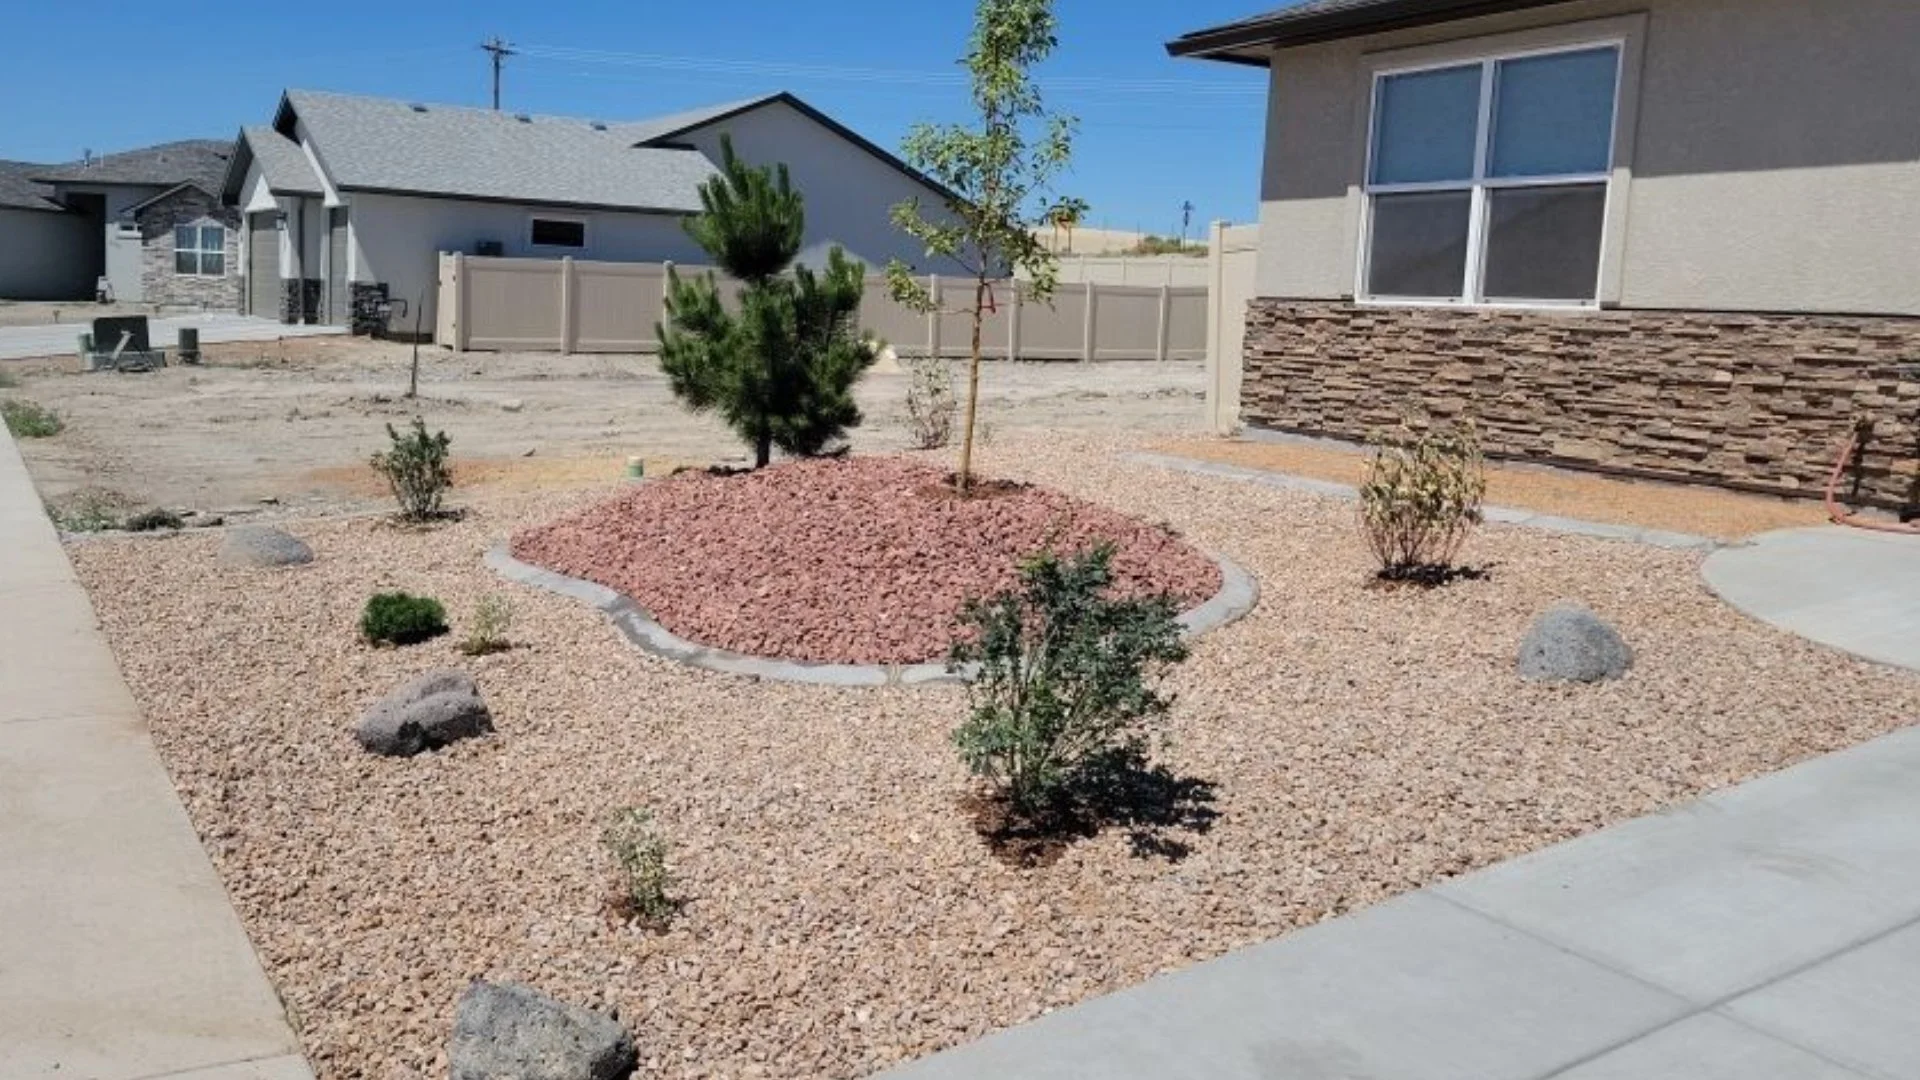 Make Your Property More Desert-Friendly by Replacing Grass With Rocks!